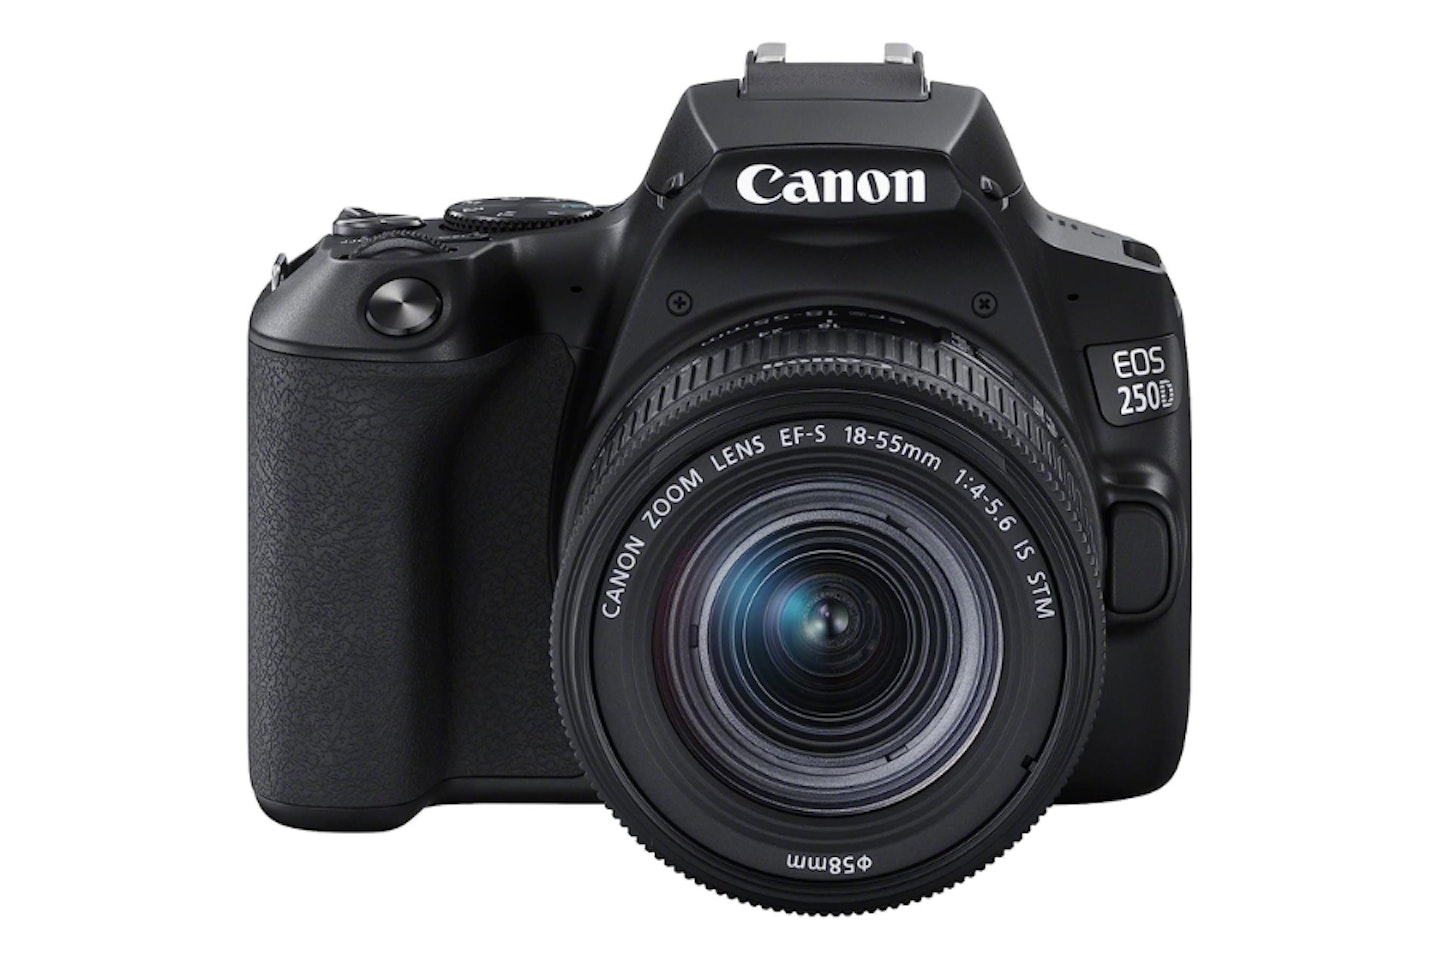 Canon EOS 250D - one of the best budget DSLR cameras